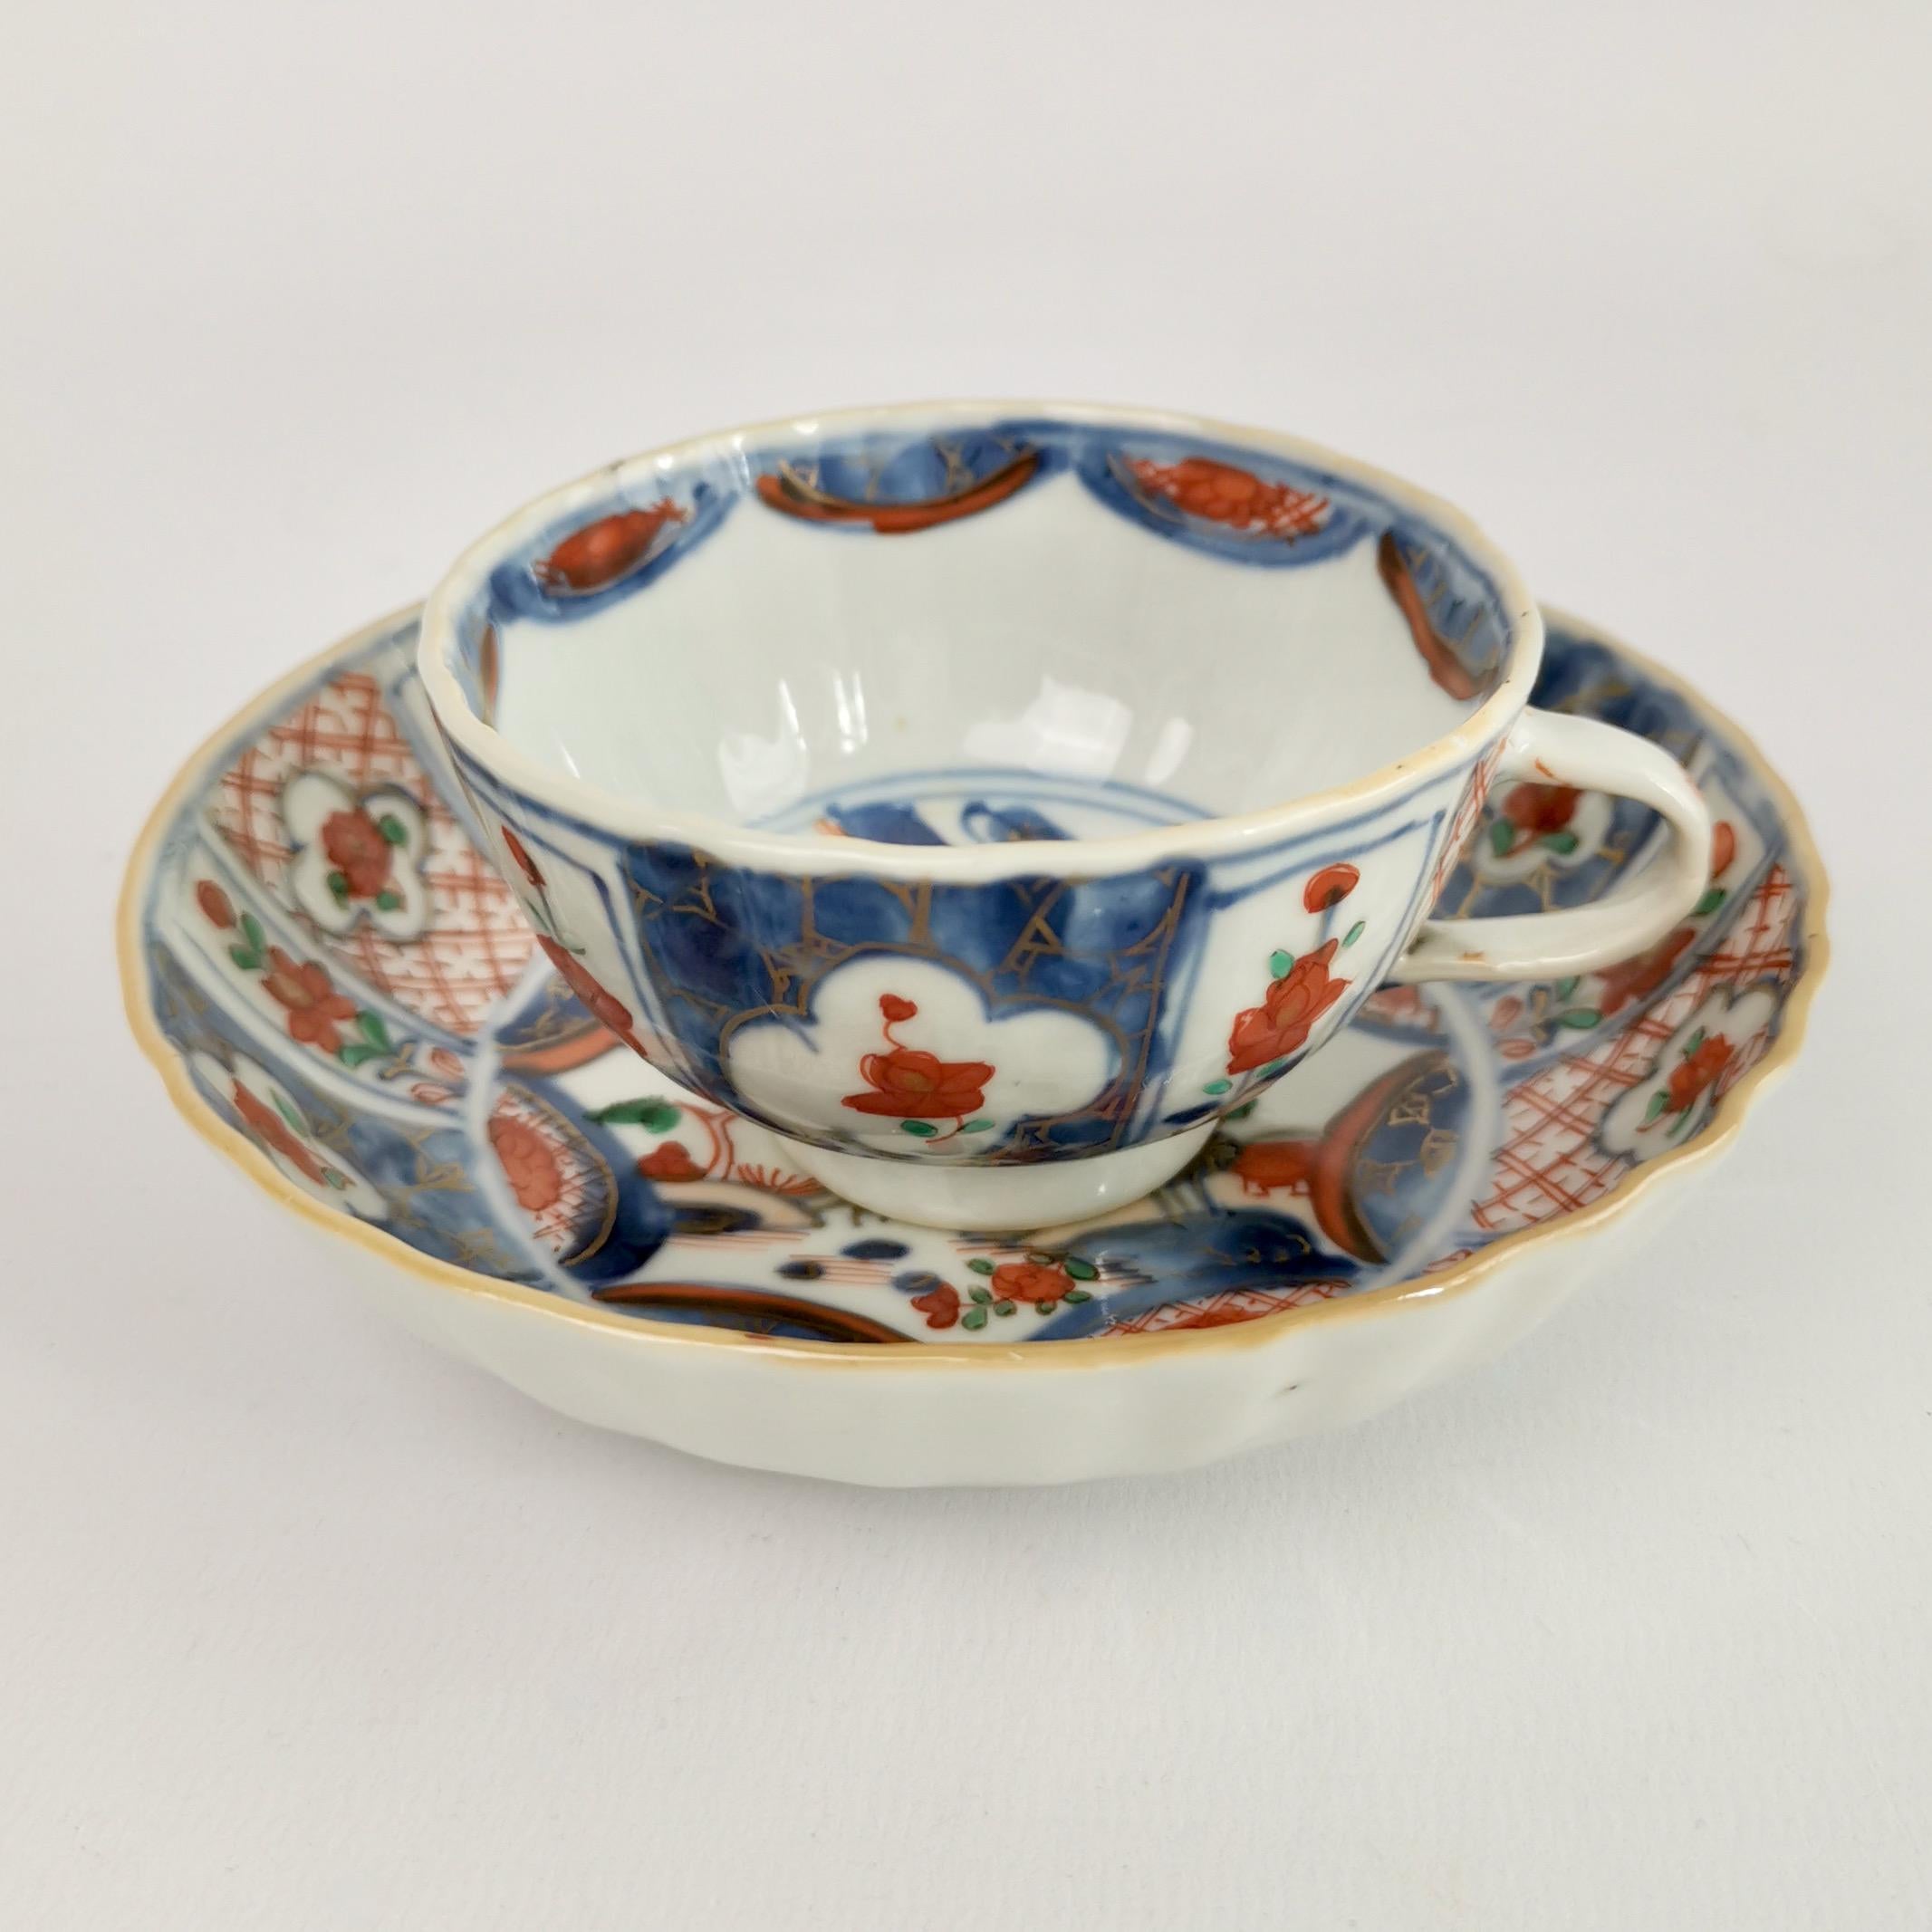 This is a beautiful set of six tea bowls and saucers made in China for export to the West in the Qianlong period in the 18th Century. The set was decorated in the Imari style.

The set is potted in fine greyish porcelain with shiny glaze, in a